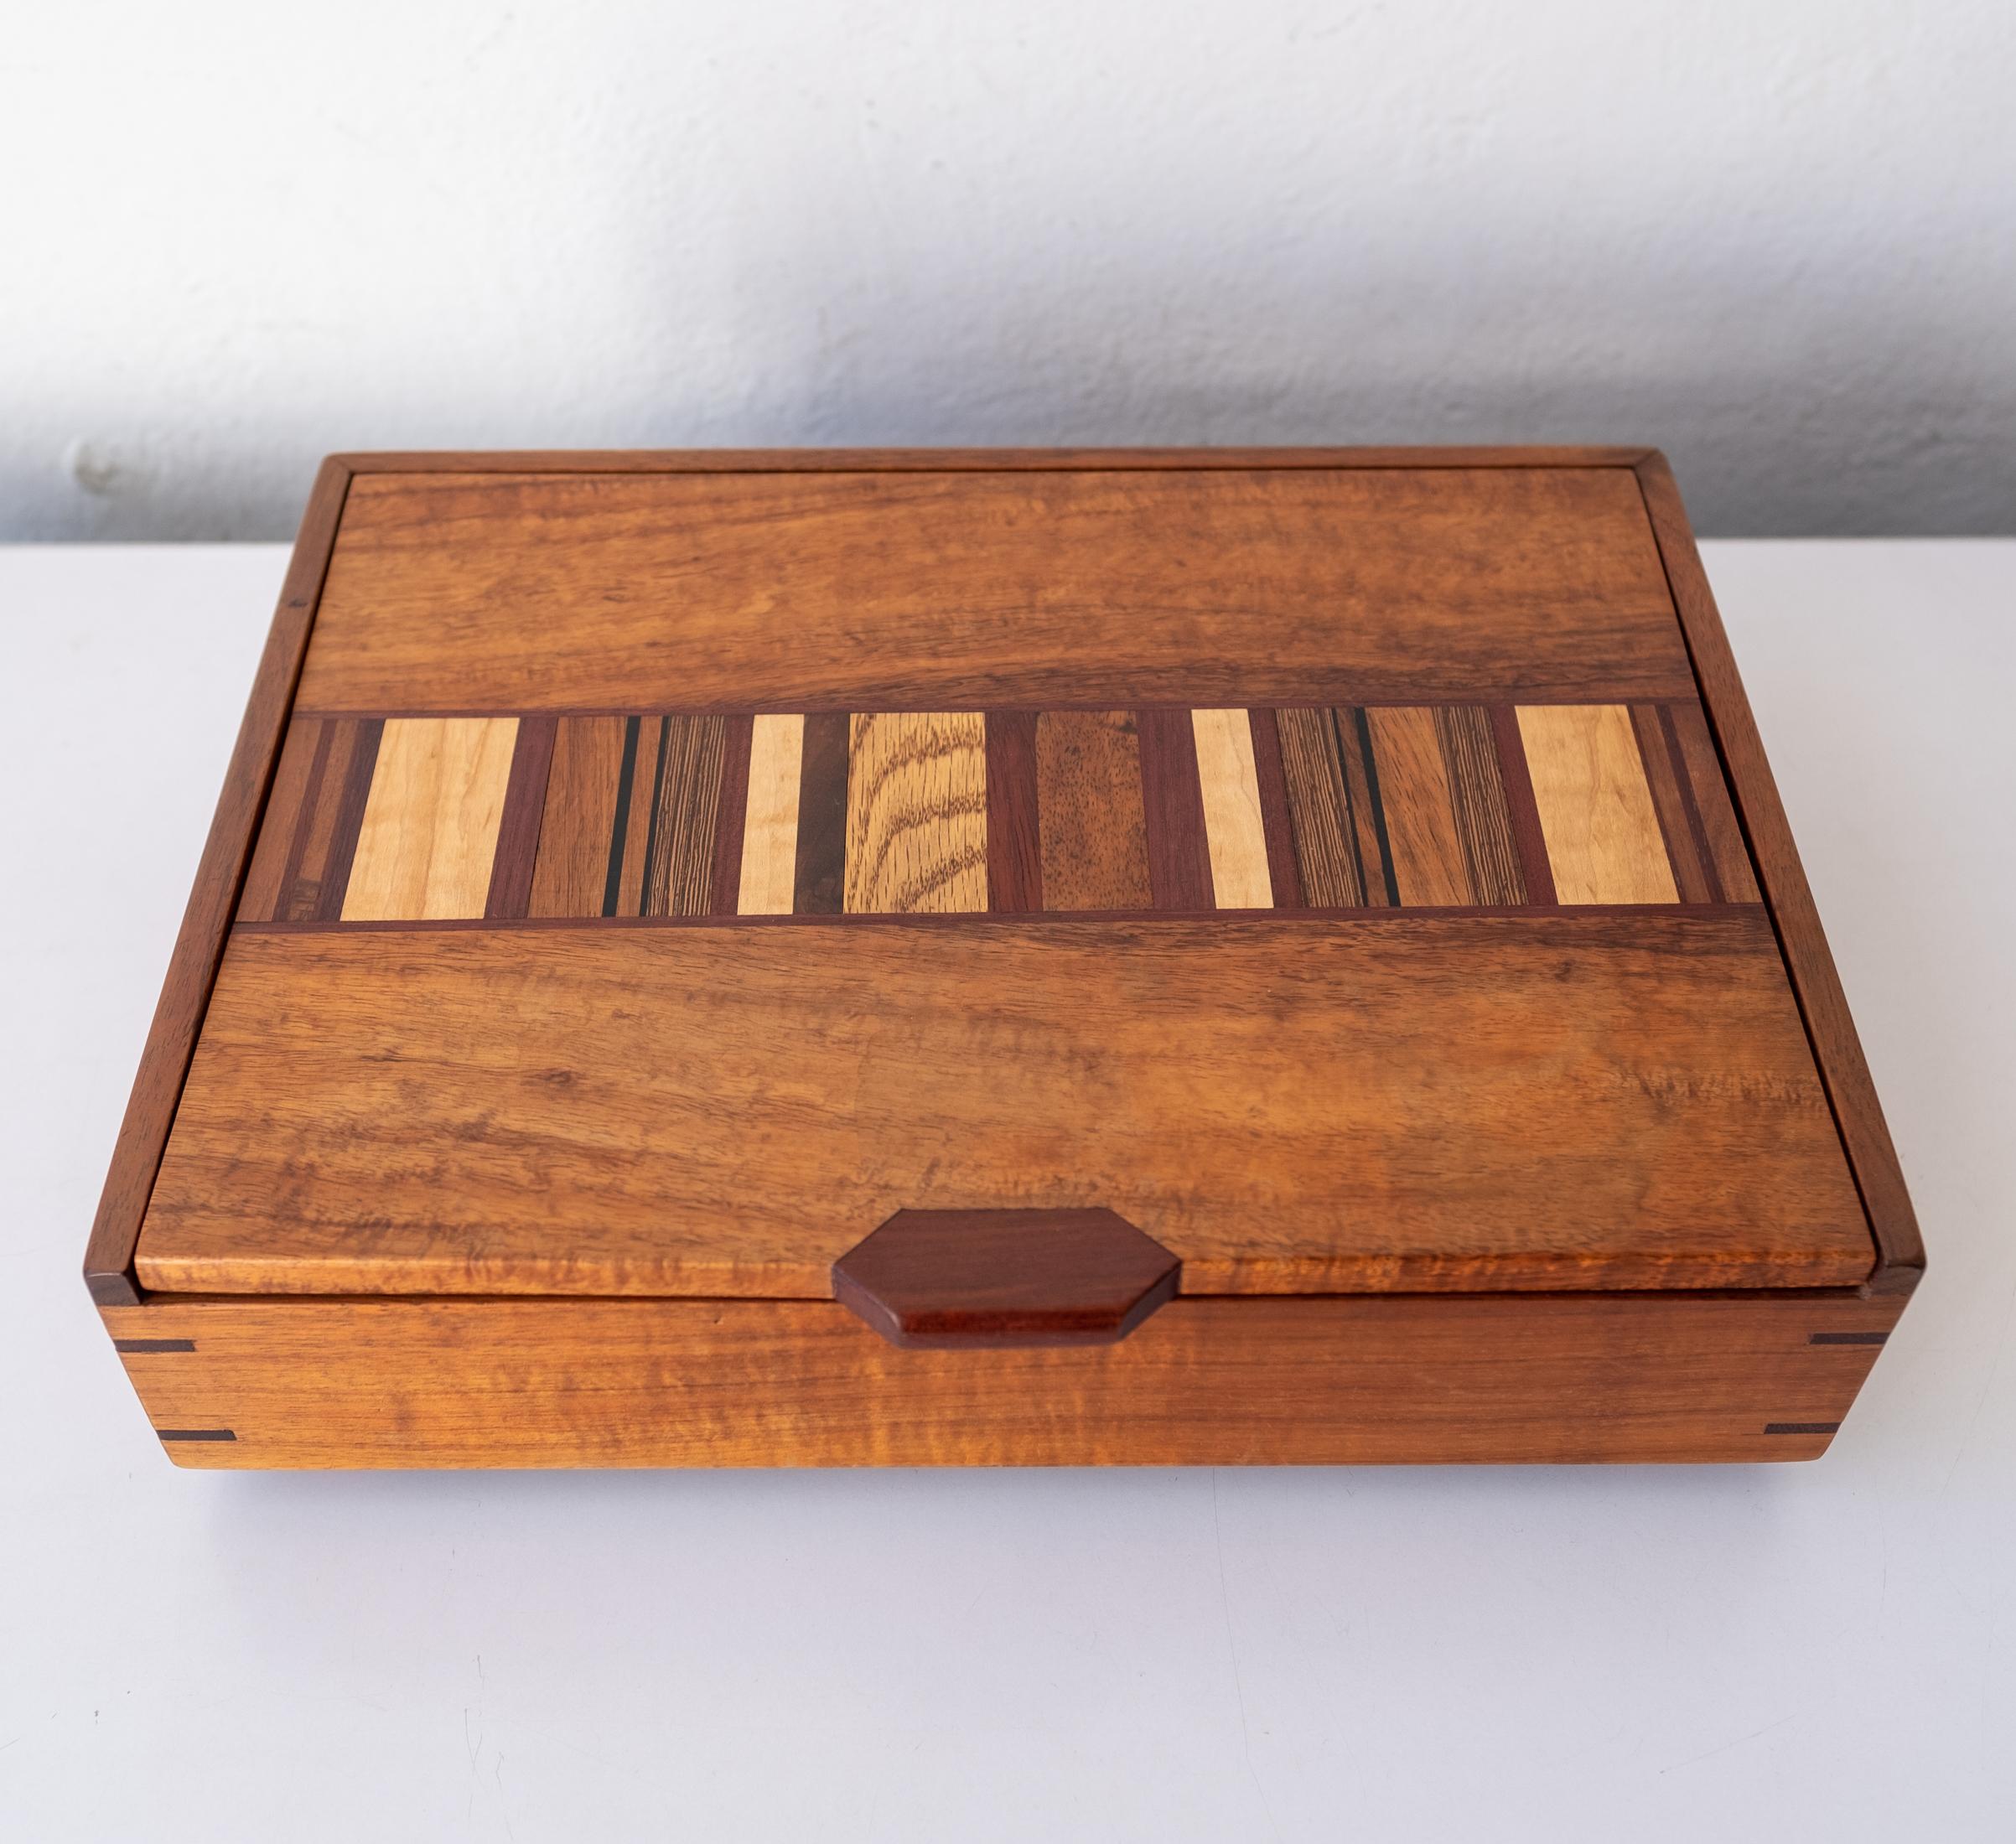 Amazing hand-crafted studio jewelry box. Mixed exotic wood with incredible joinery. Felt-lined dividers.